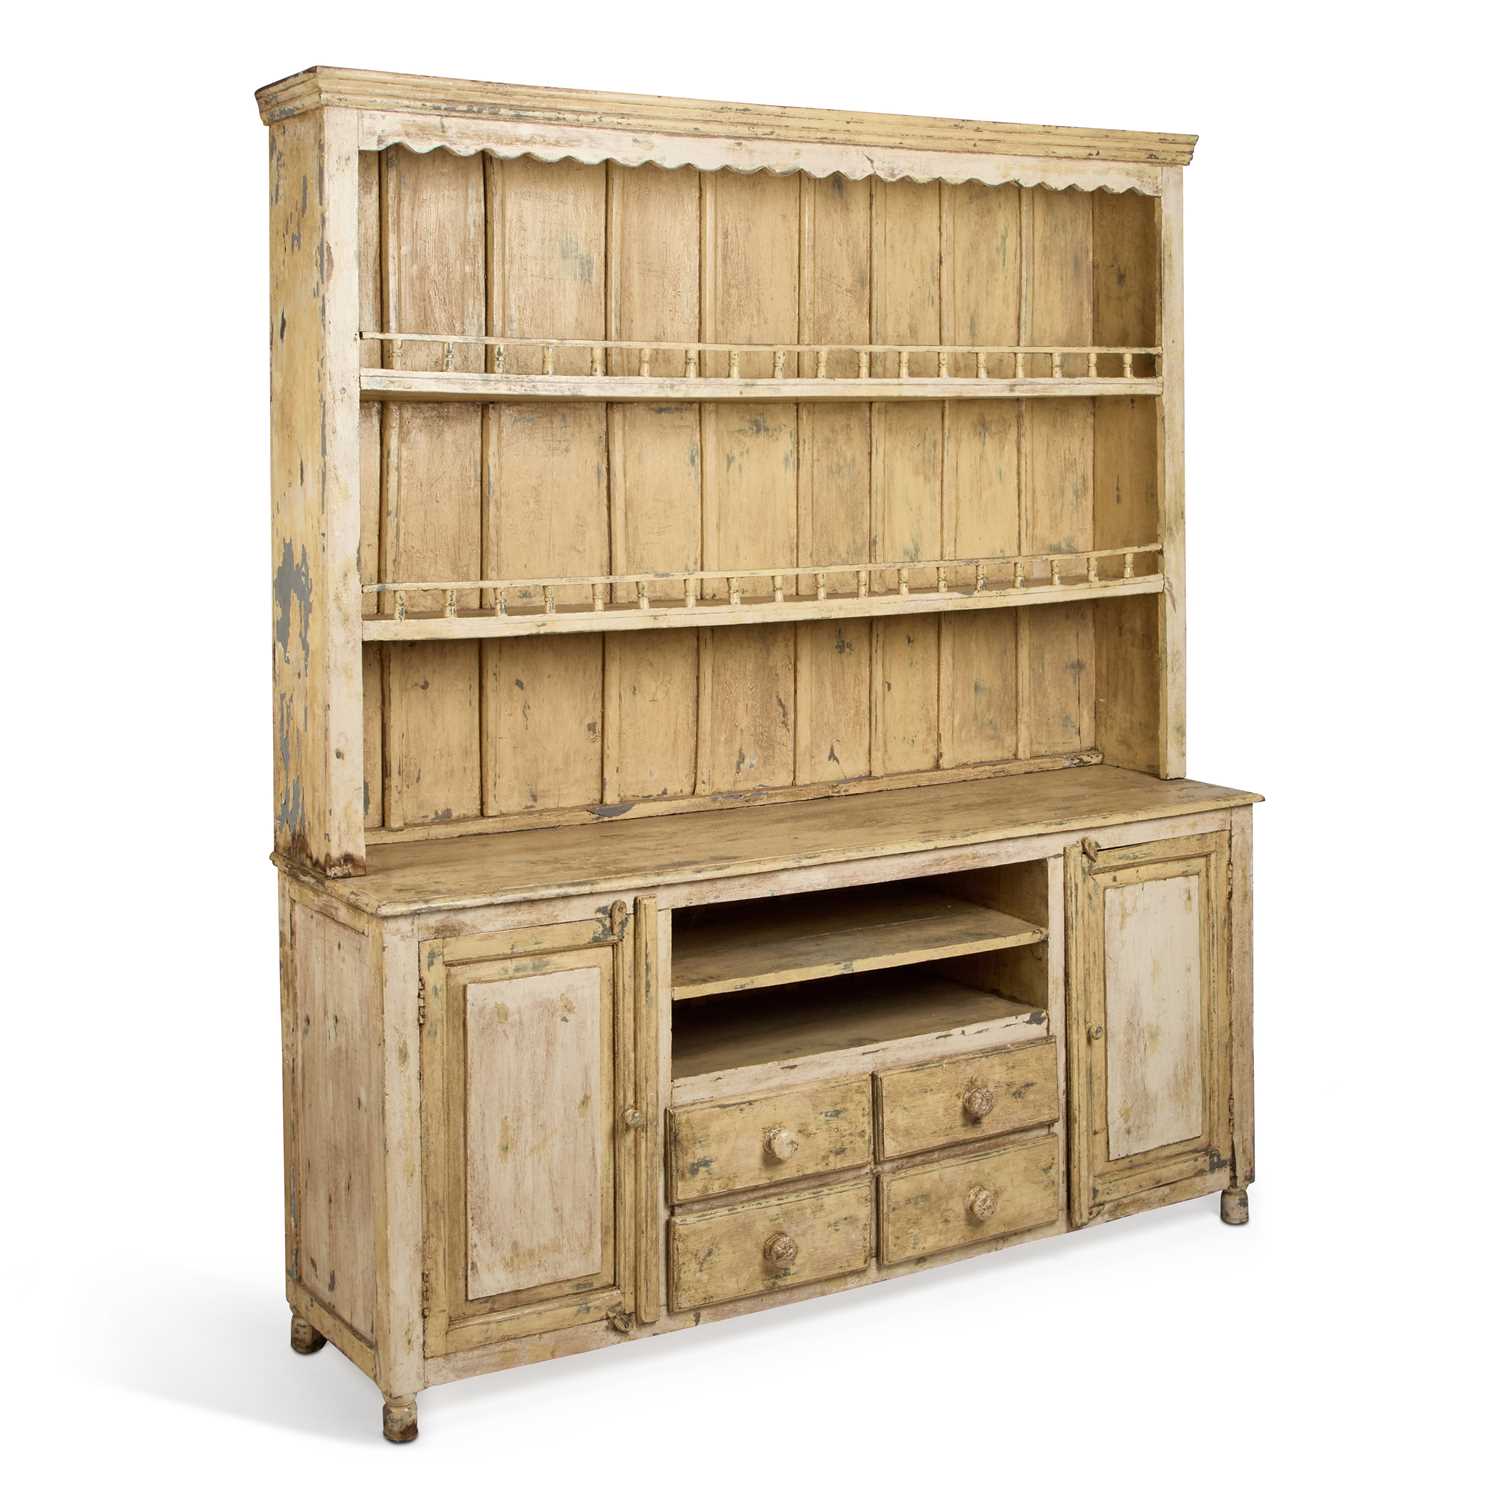 A 19TH CENTURY FRENCH PAINTED PINE DRESSER AND RACK